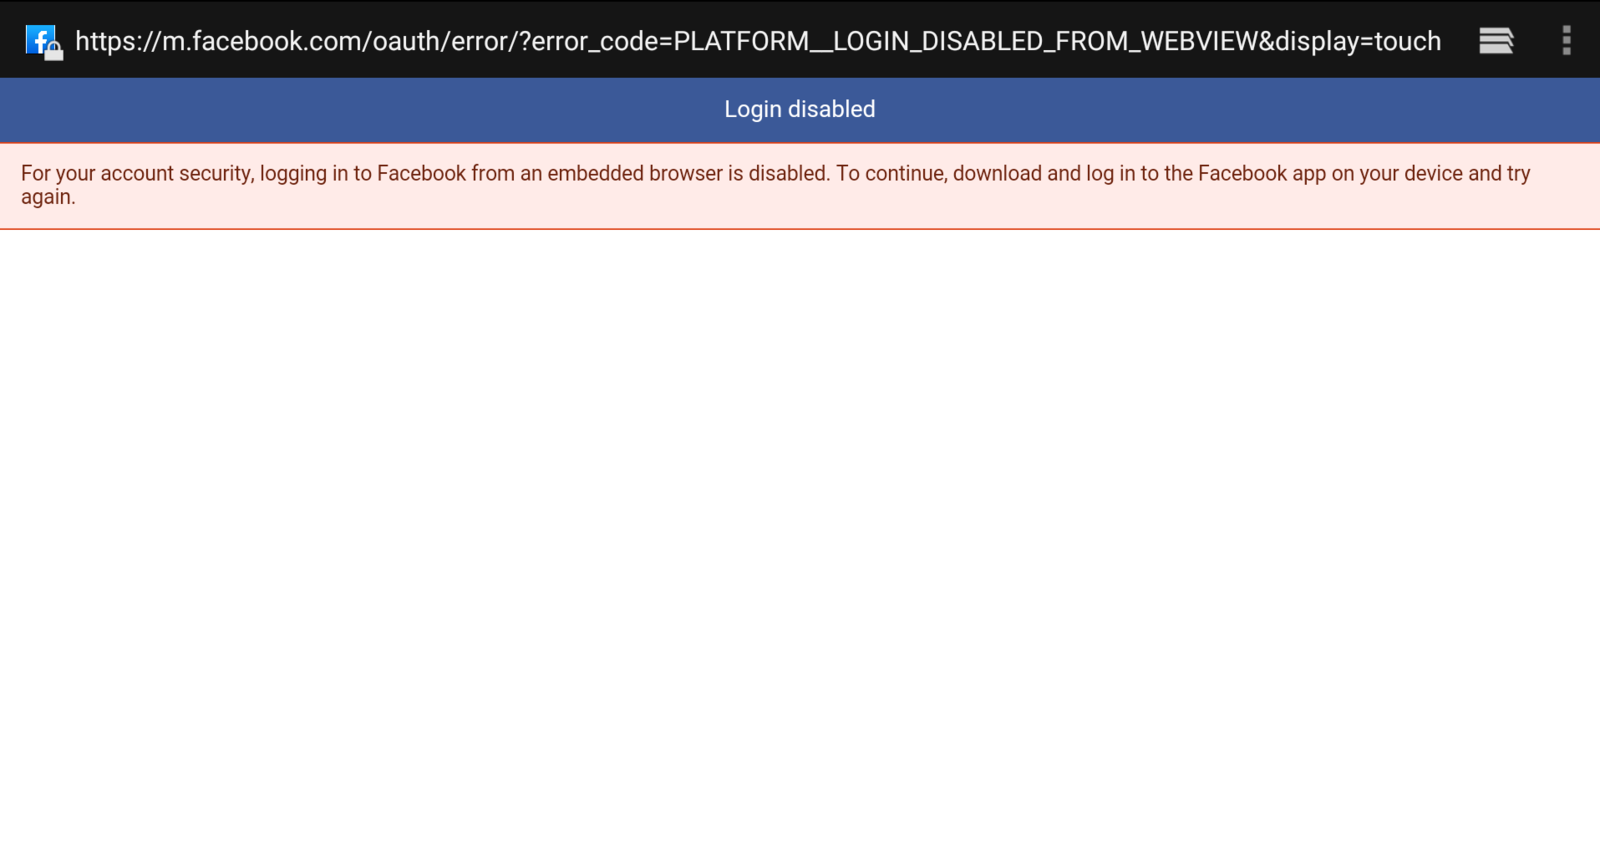 How to fix the issue when logging into Facebook is disabled